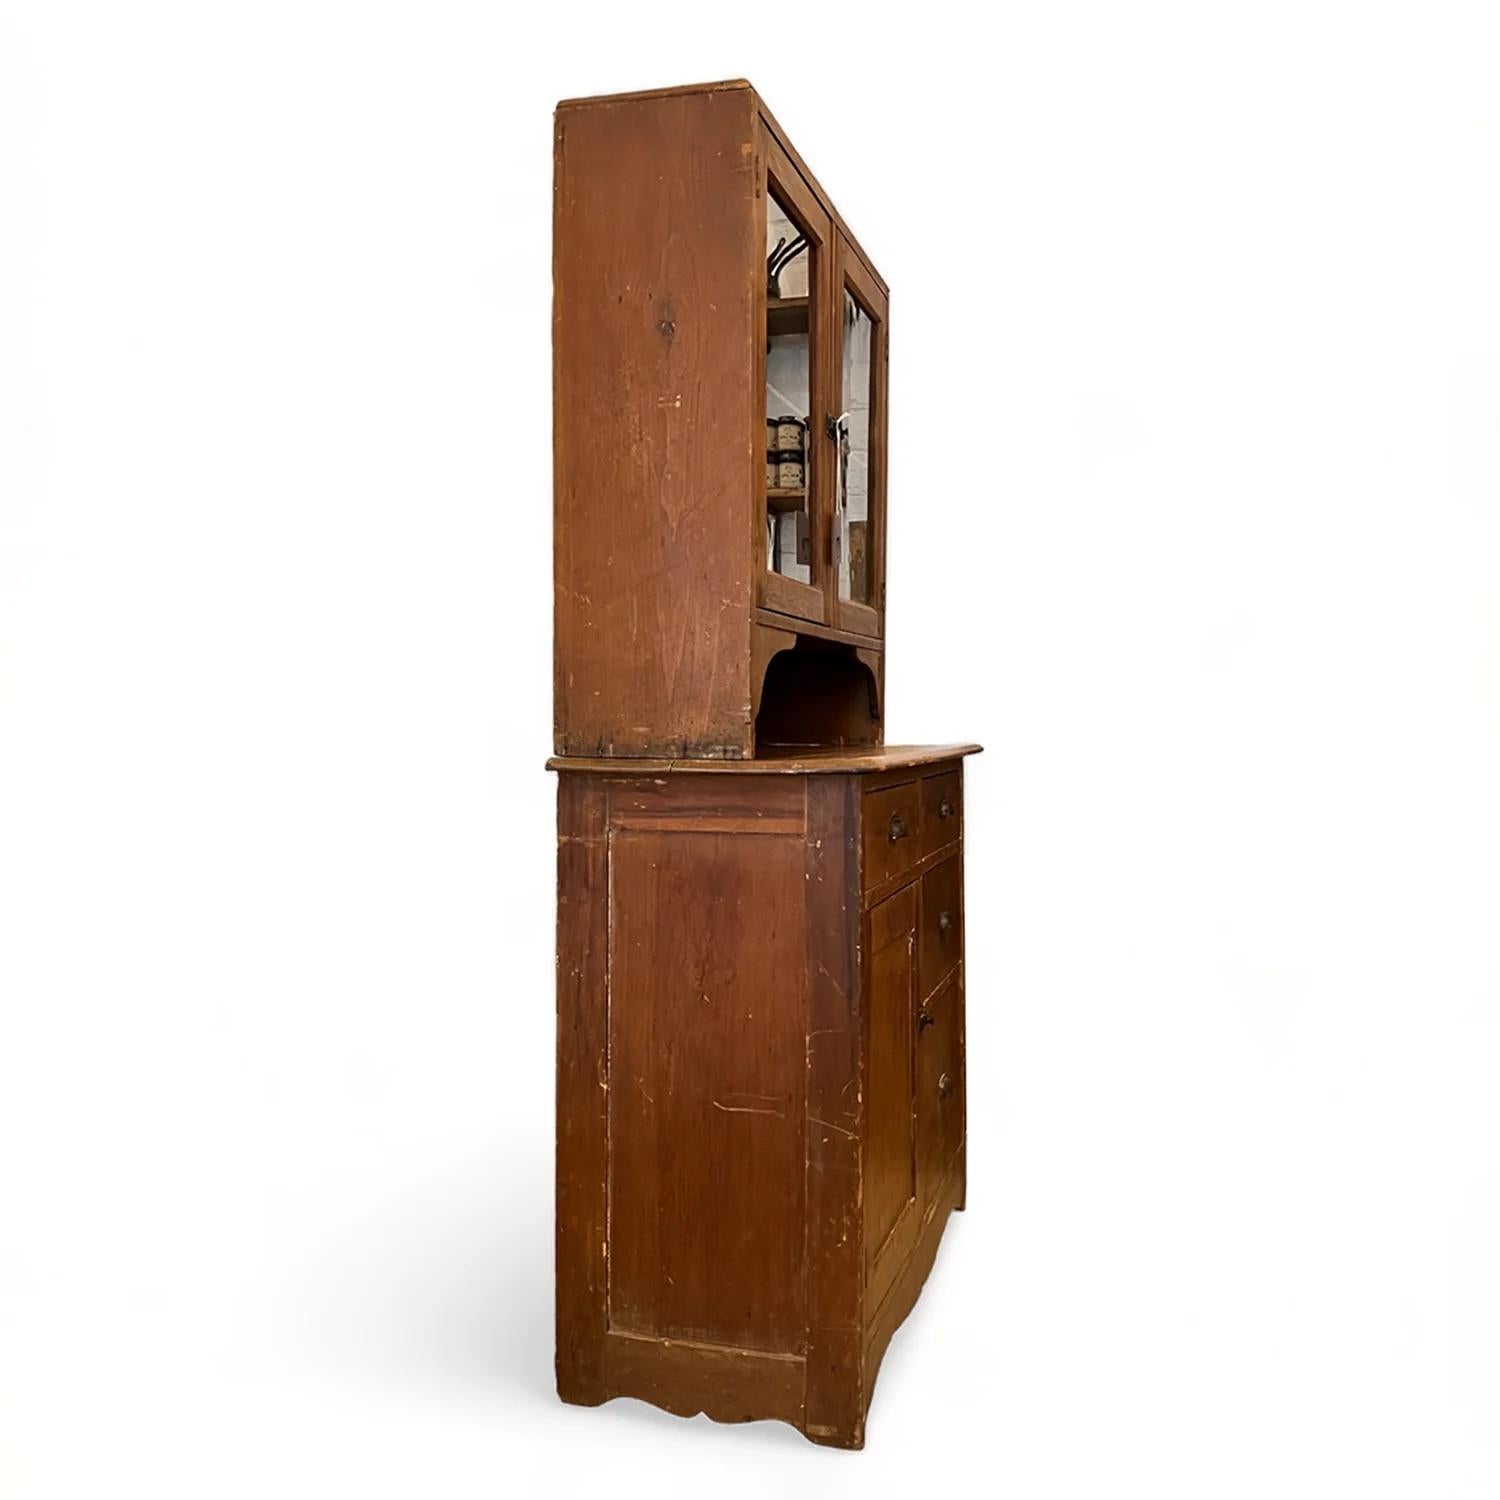 This timeless American farmhouse kitchen hutch cabinet, dating back to the early 20th century, boasts a rich patina and rustic charm. Its exquisite design includes an upper step-back hutch with two glass-paneled doors, providing a tasteful showcase